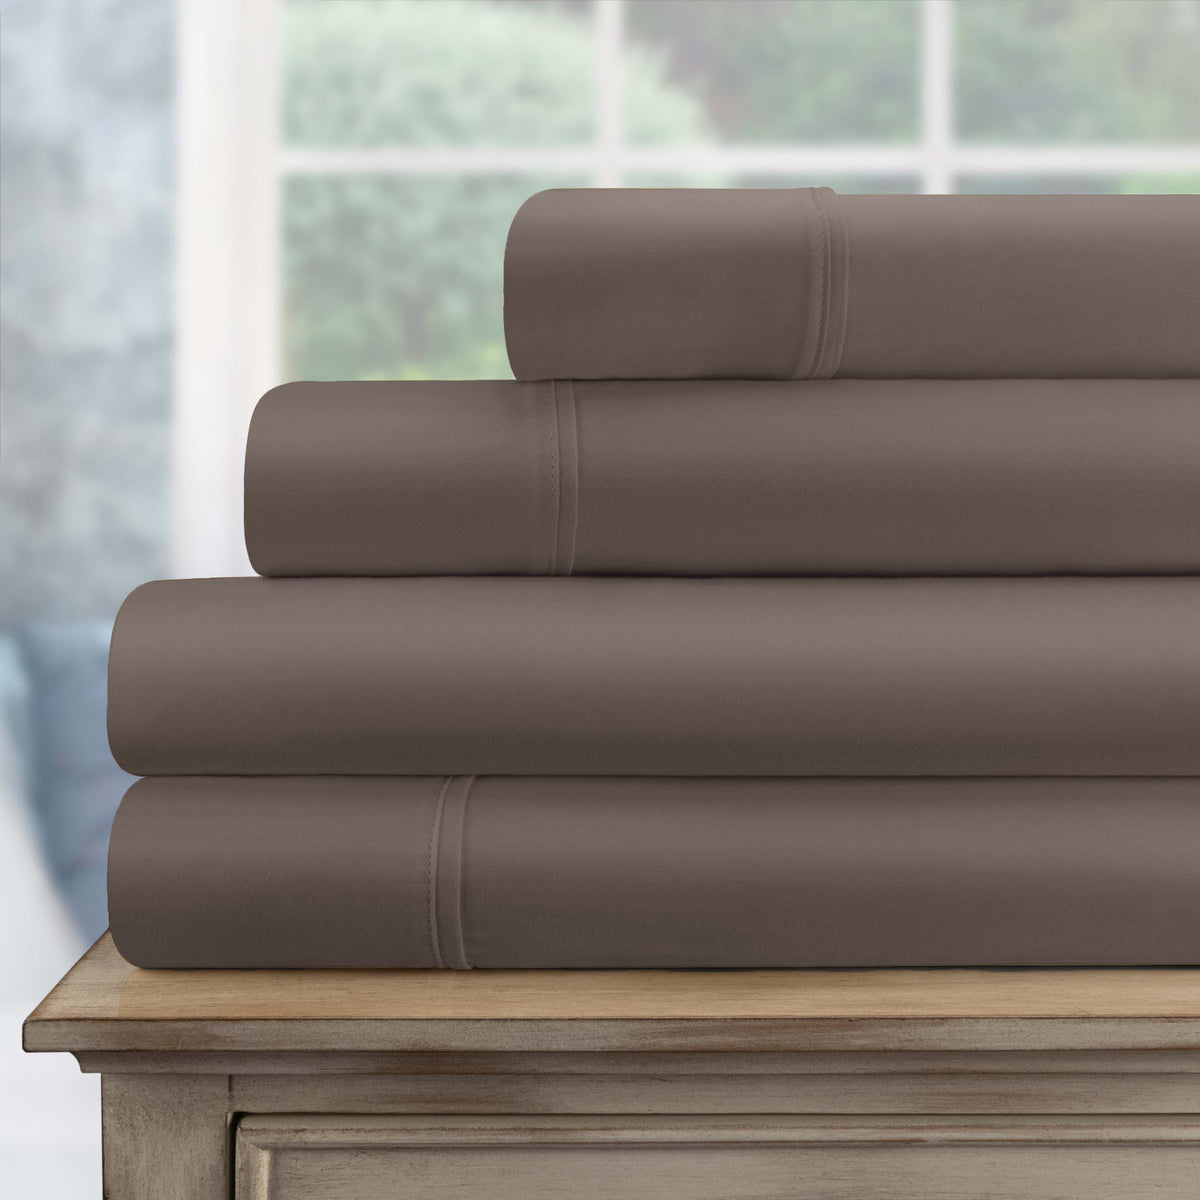 Egyptian Cotton 700 Thread Count Eco Friendly Solid Sheet Set - Gray